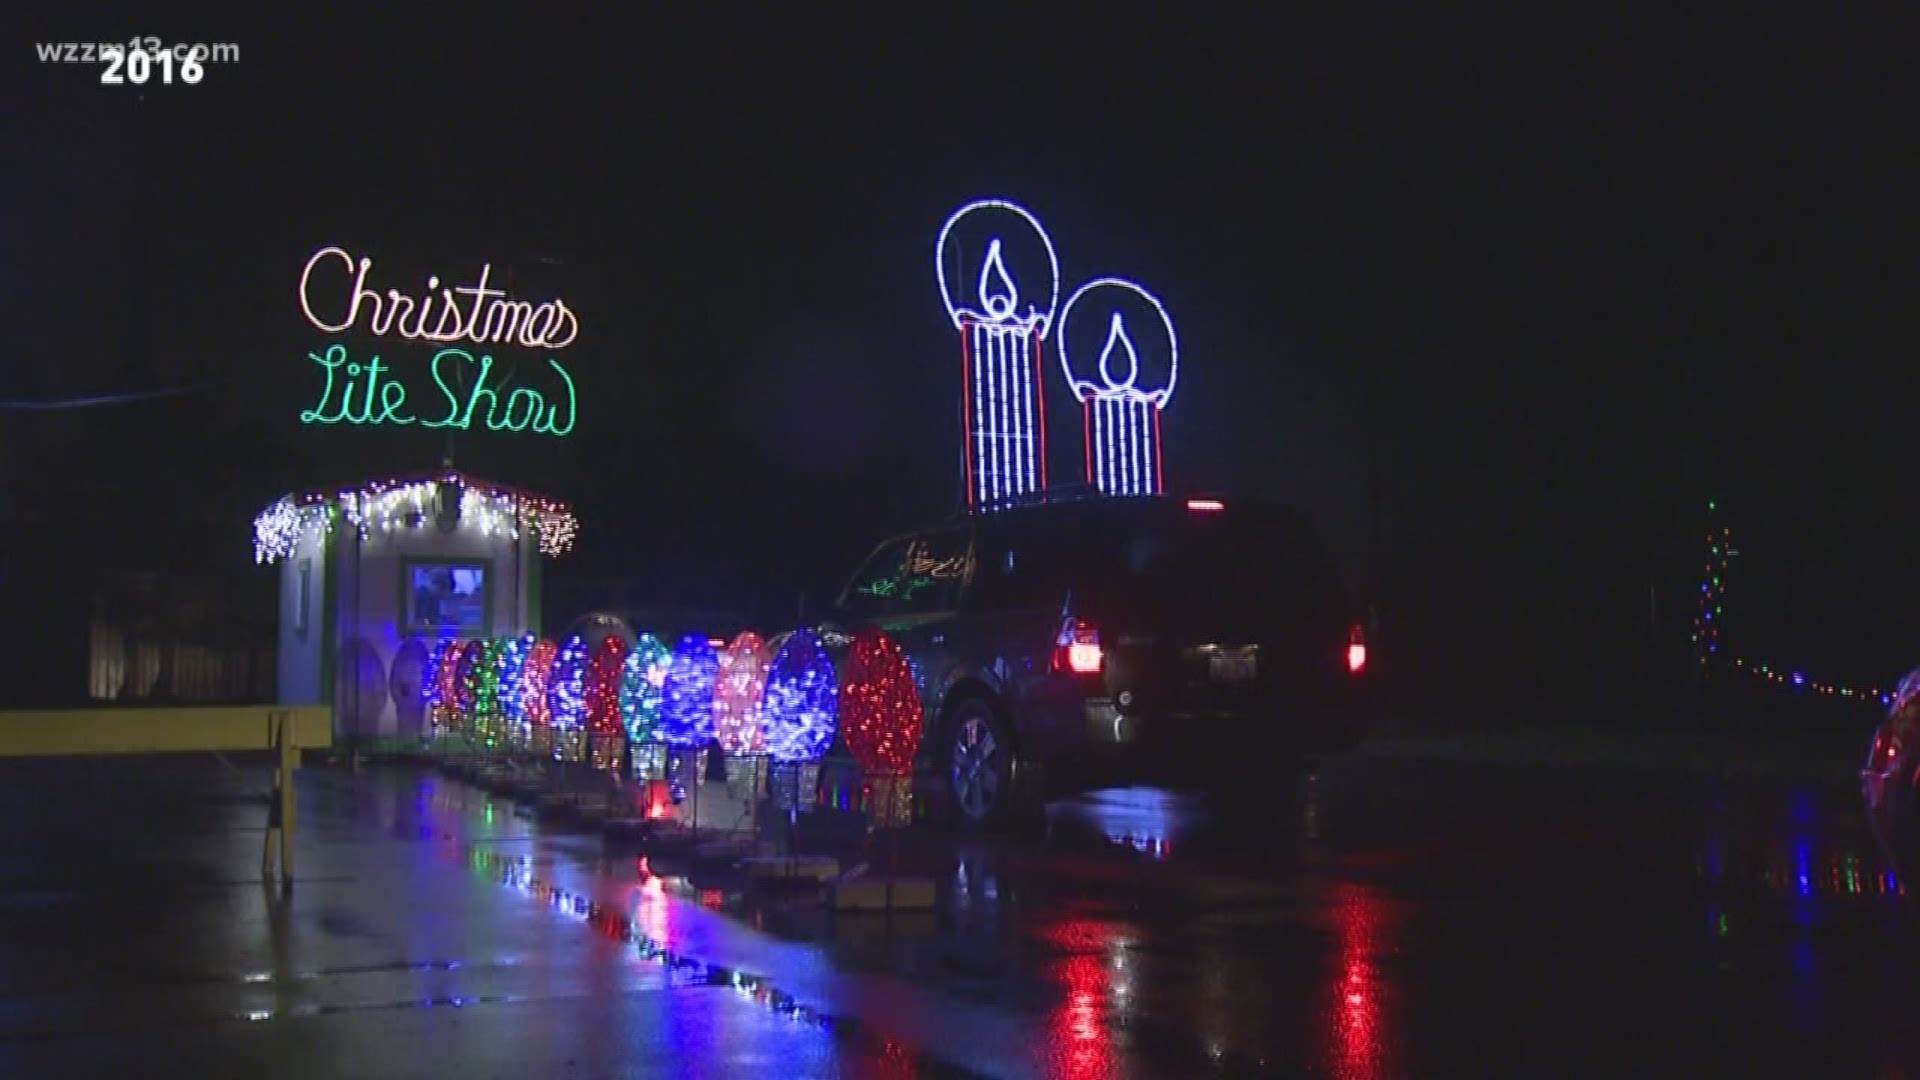 13 ON YOUR SIDE's Angela Cunningham takes a closer look at Fifth Third Ballpark's Christmas Lite Show.